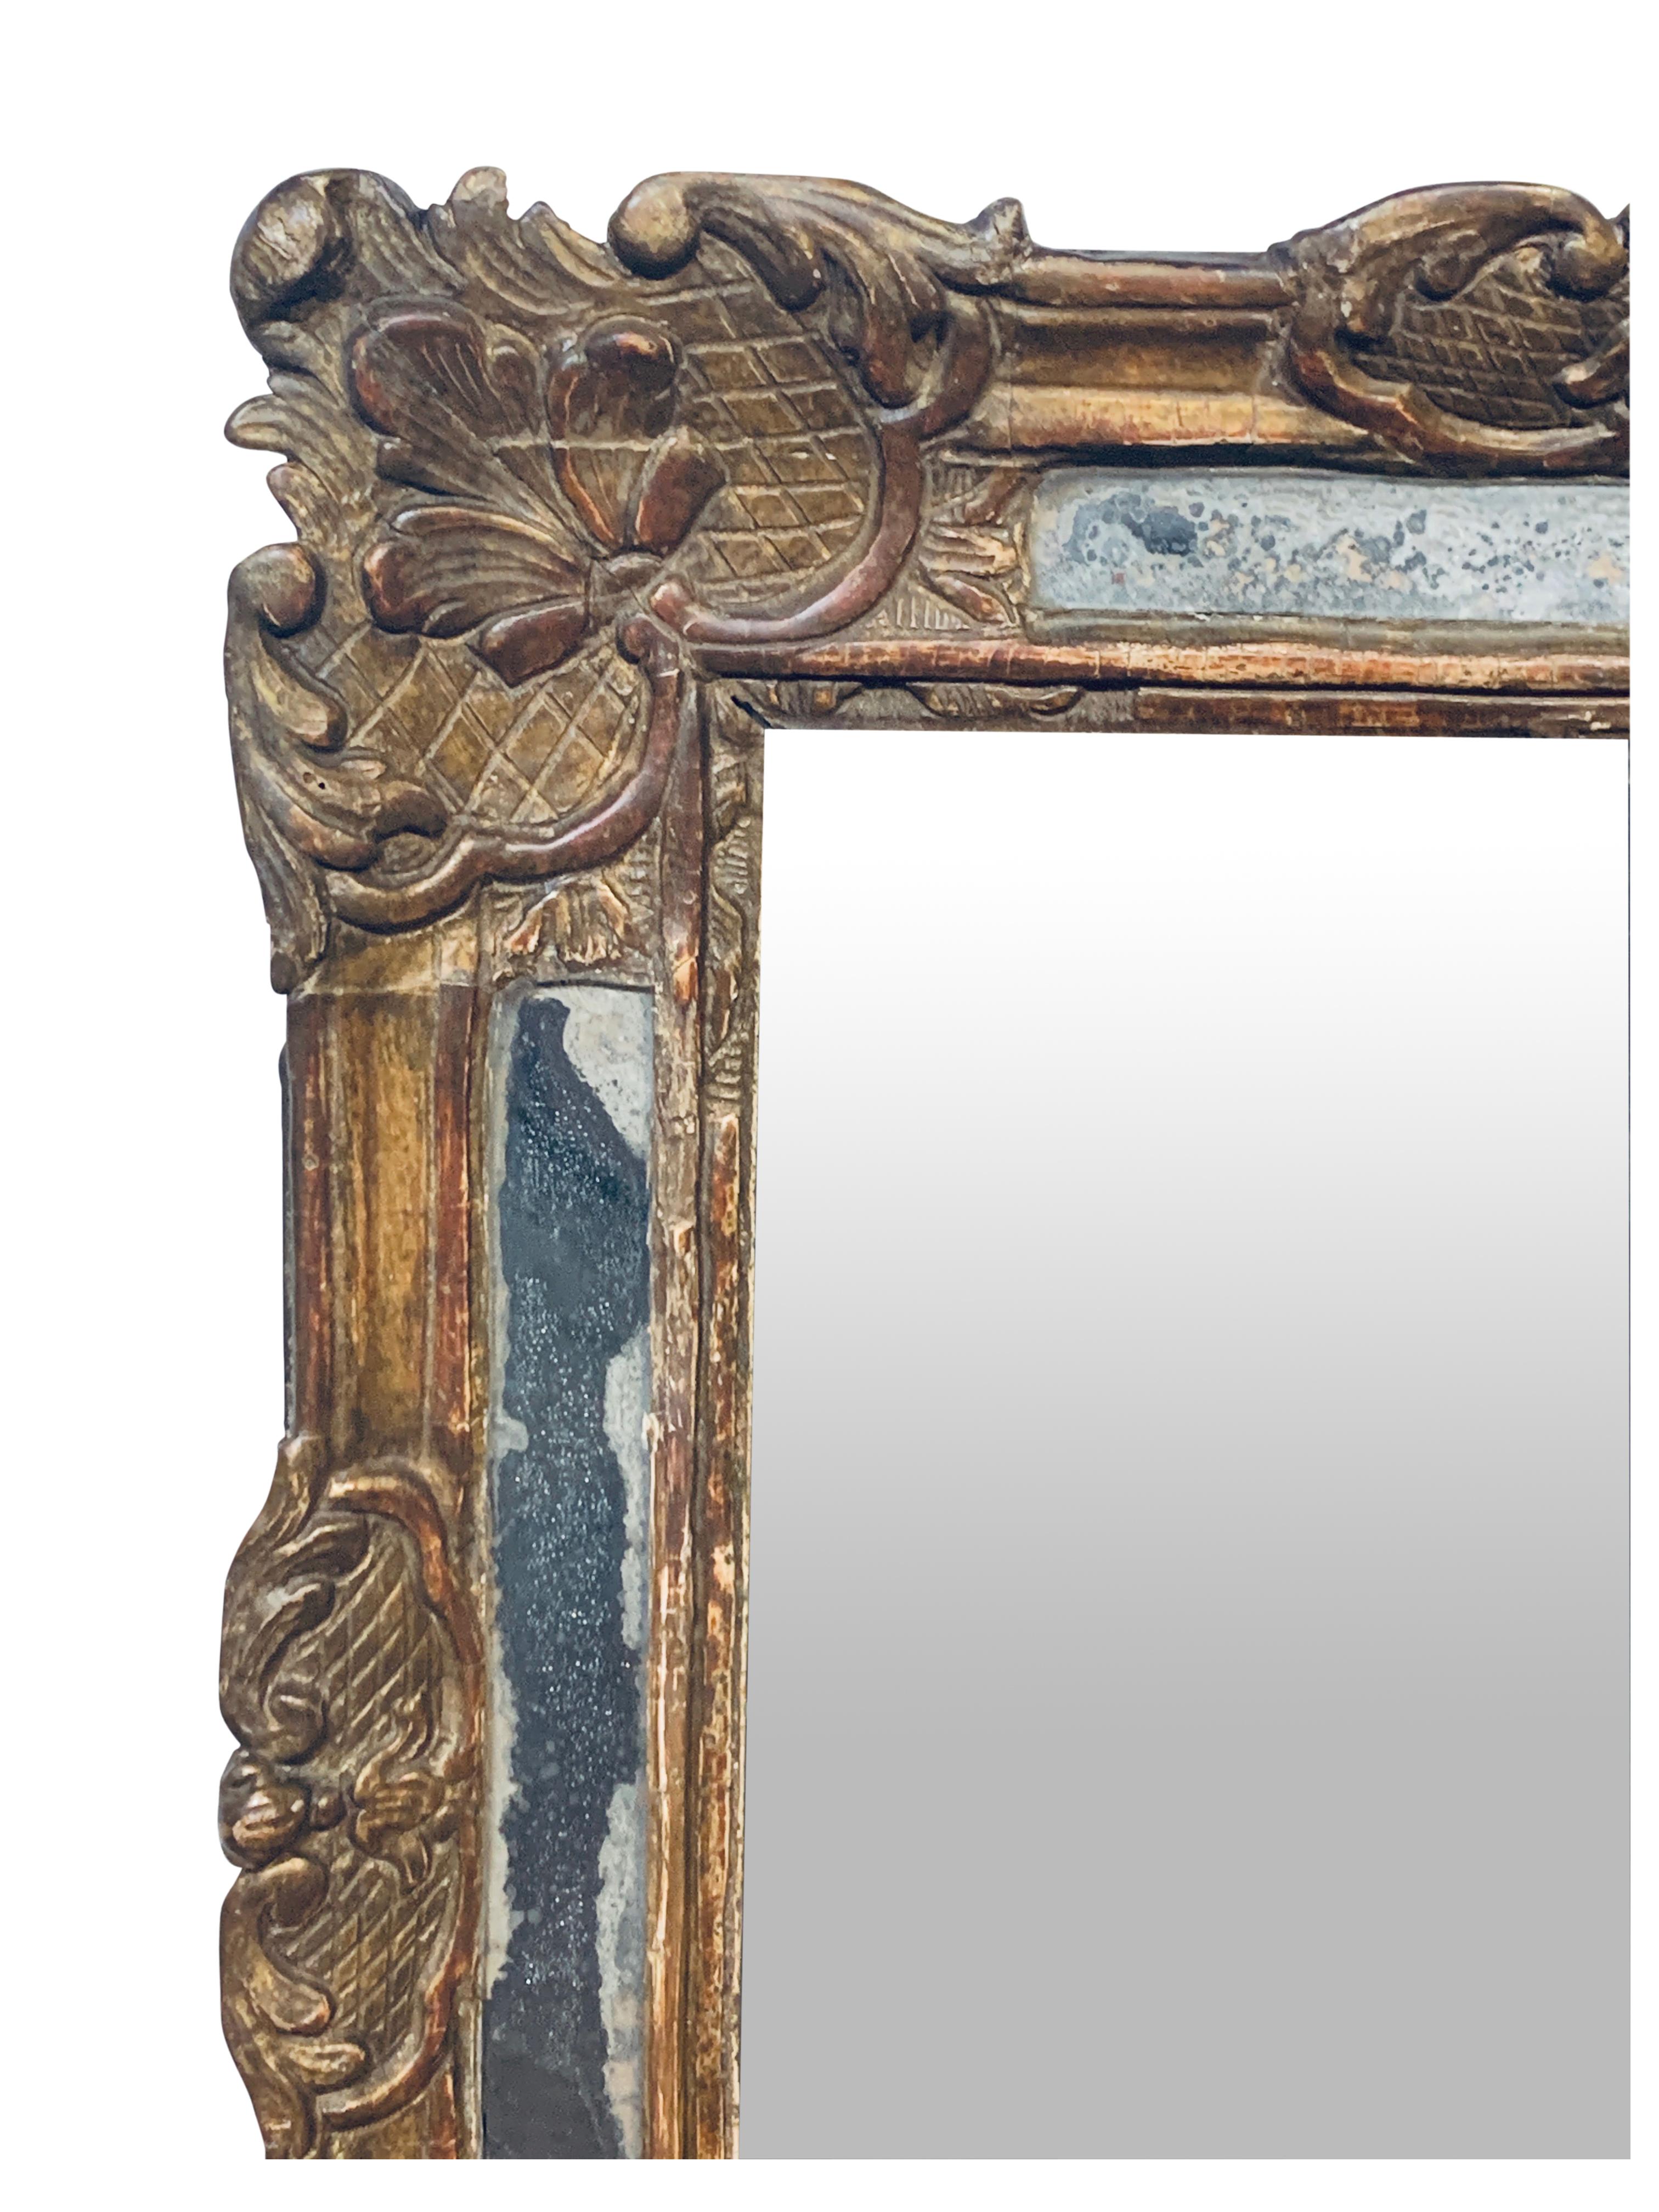 Very nice, authentic, period Louis XV mirror with segmented mirror plates along outer edges. Large central glass may be 19th Century French plate. Backboard old, but not original. Gilding is gold leaf and has toned by age. Silvering of outer mirrors